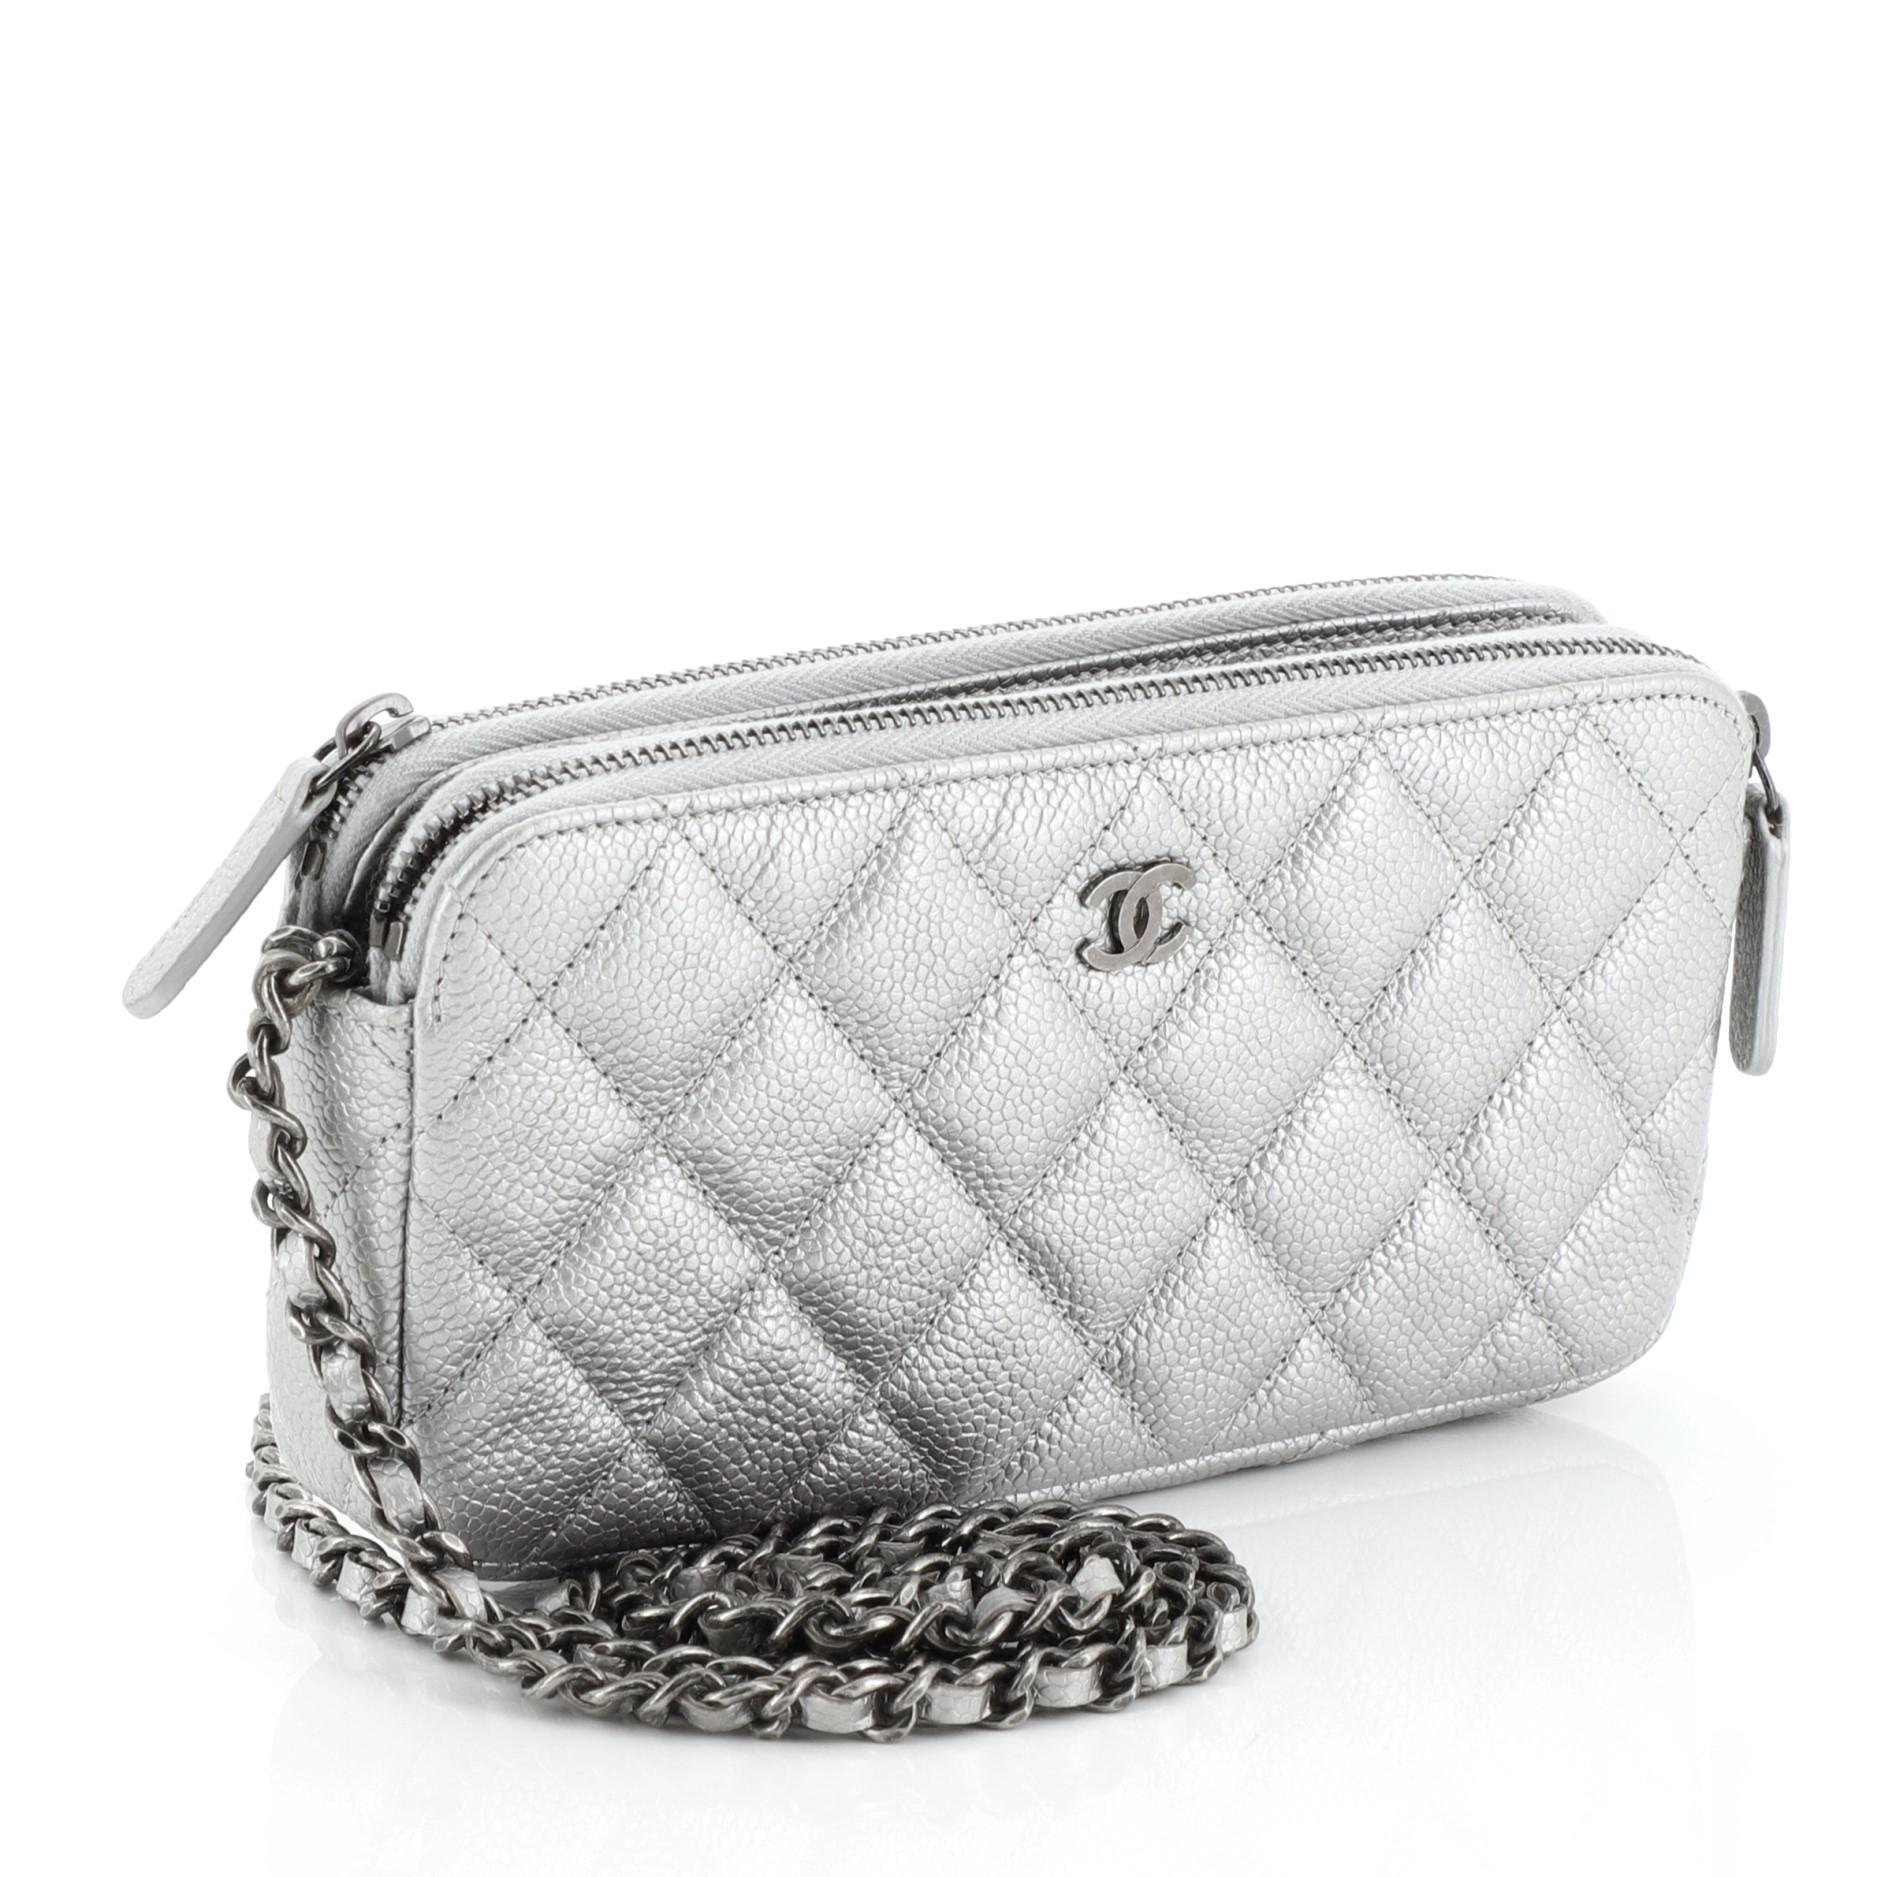 This Chanel Double Zip Clutch with Chain Quilted Caviar, crafted in gray quilted caviar leather, features a detachable woven-in leather chain strap, front CC logo and aged silver-tone hardware. Its double zip closures and an open center compartment